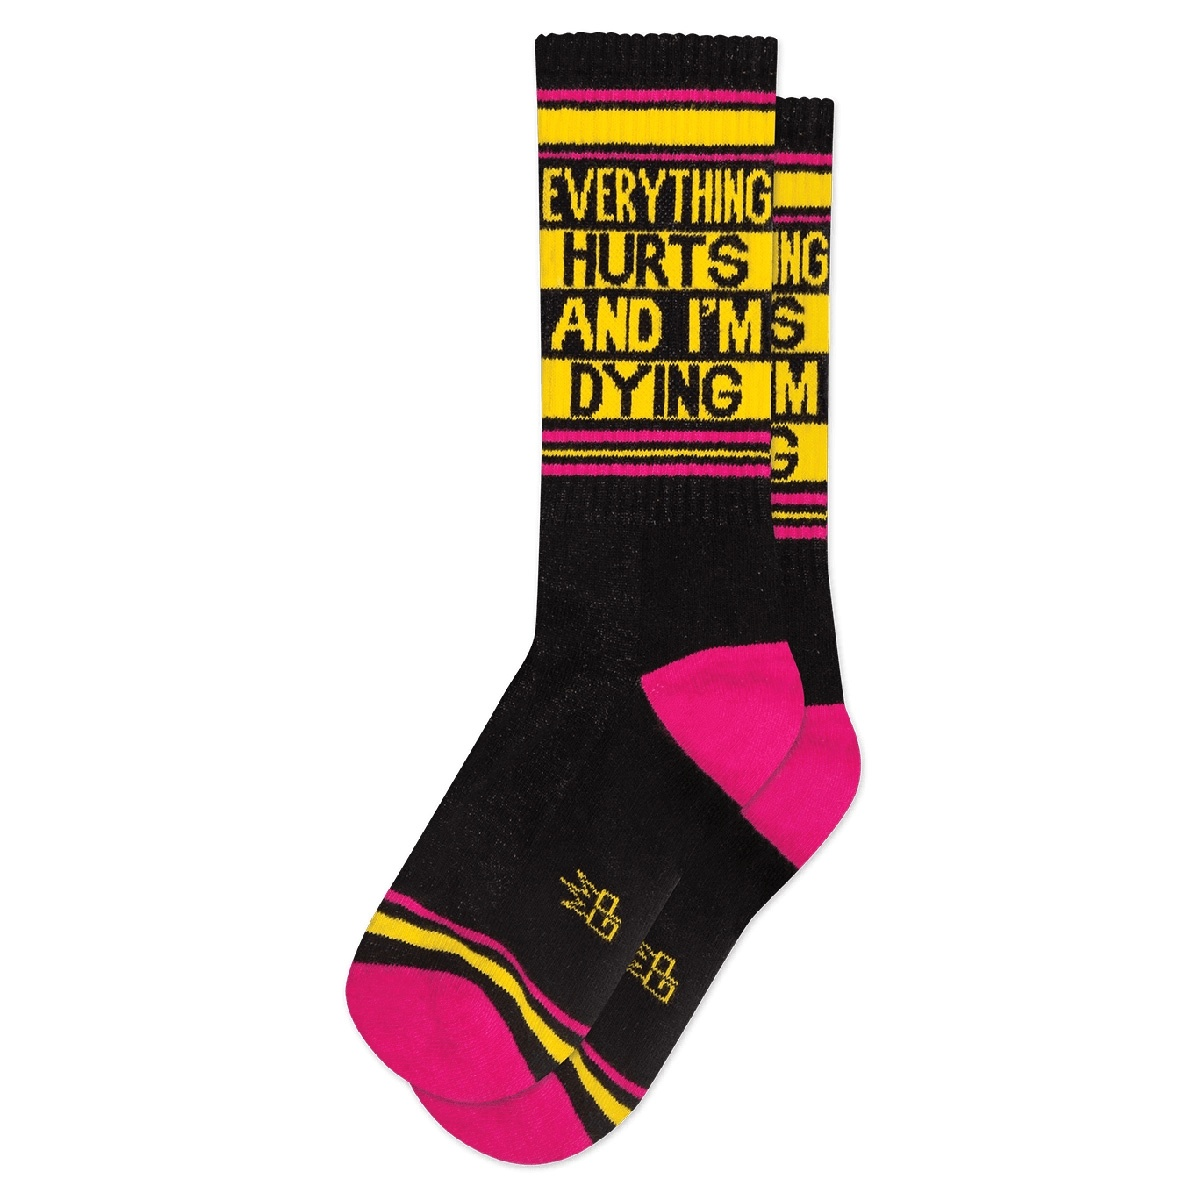 Gumball Poodle "Everything Hurts and I'm Dying" Socks